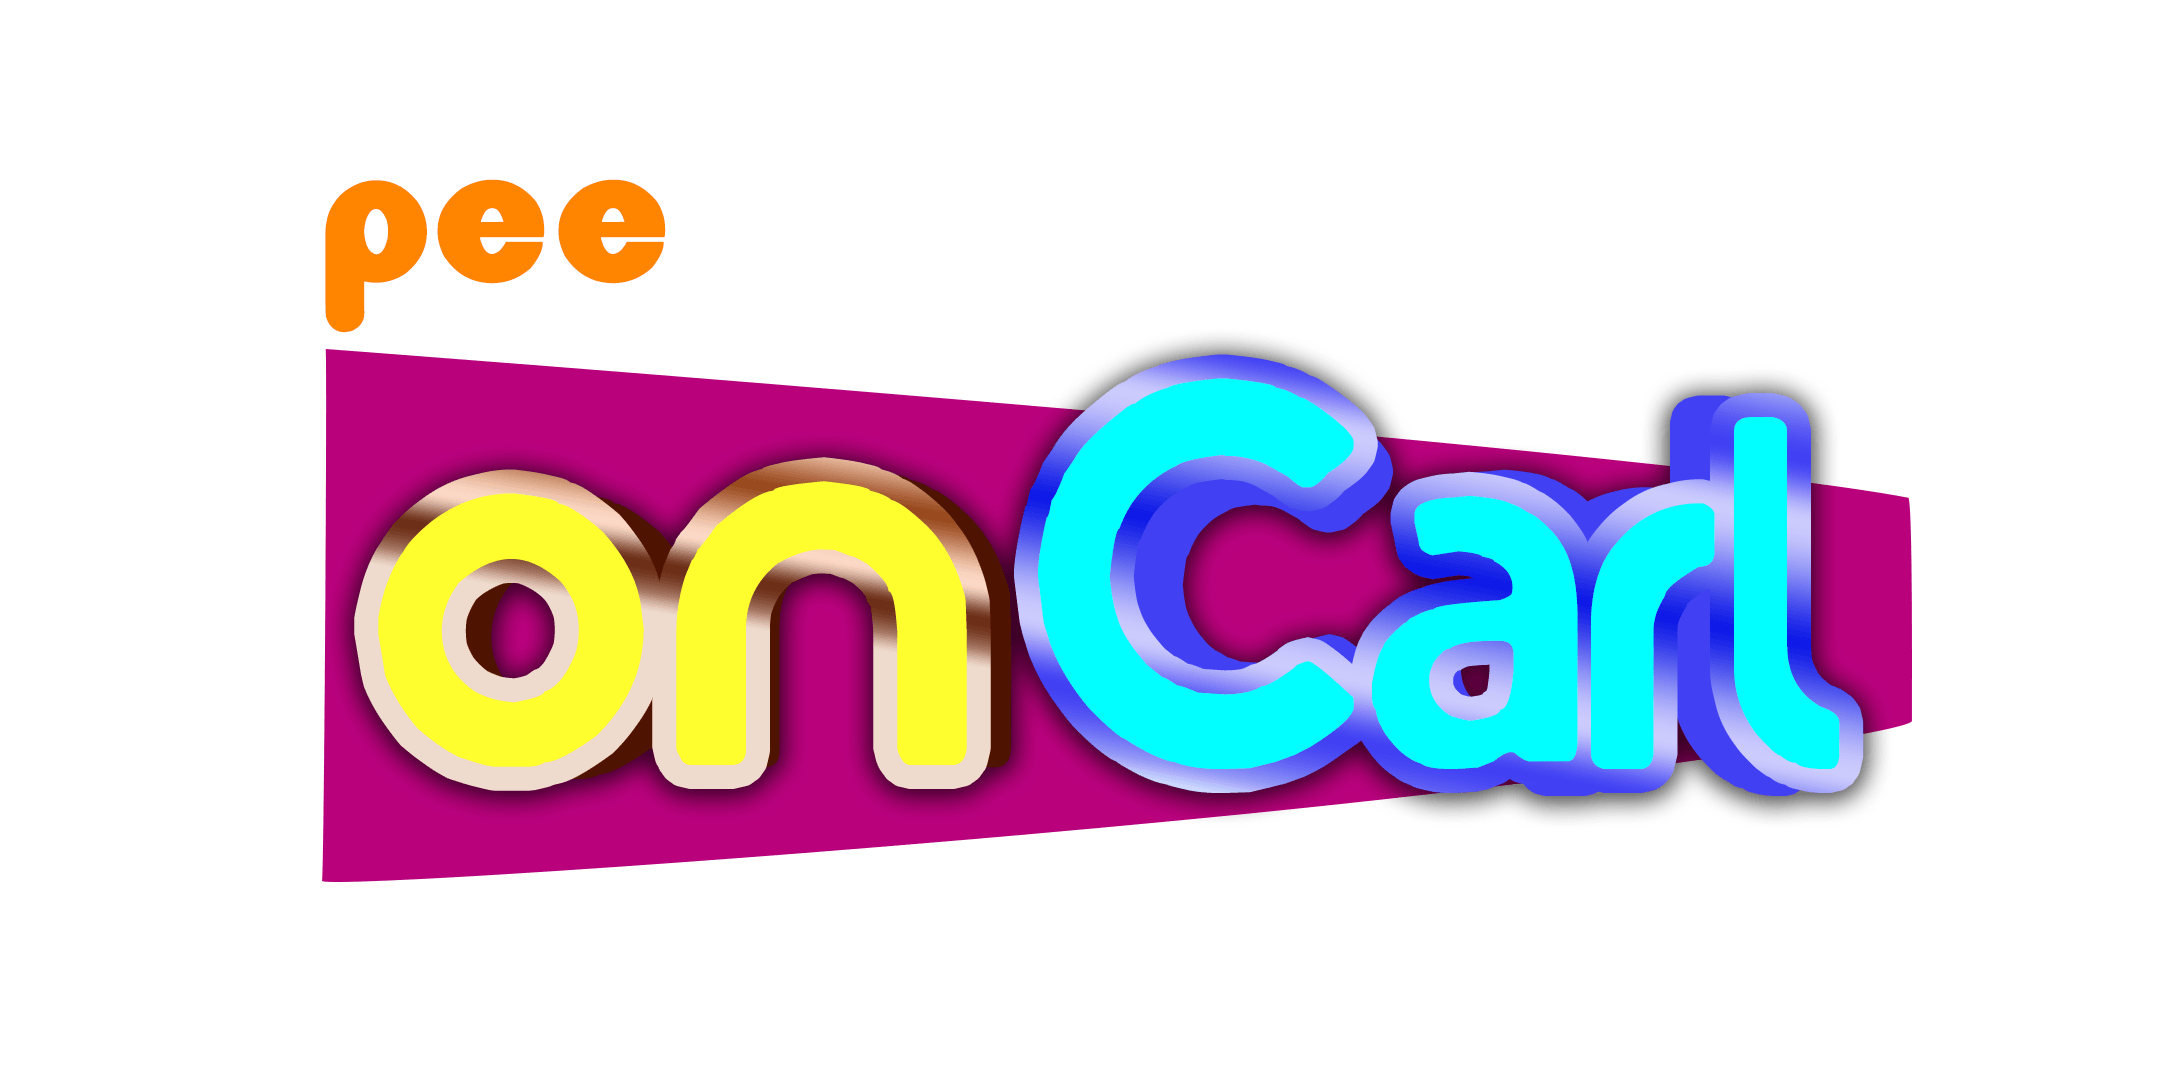 Icarly.com Logo - please go online to icarly.com : sbubby